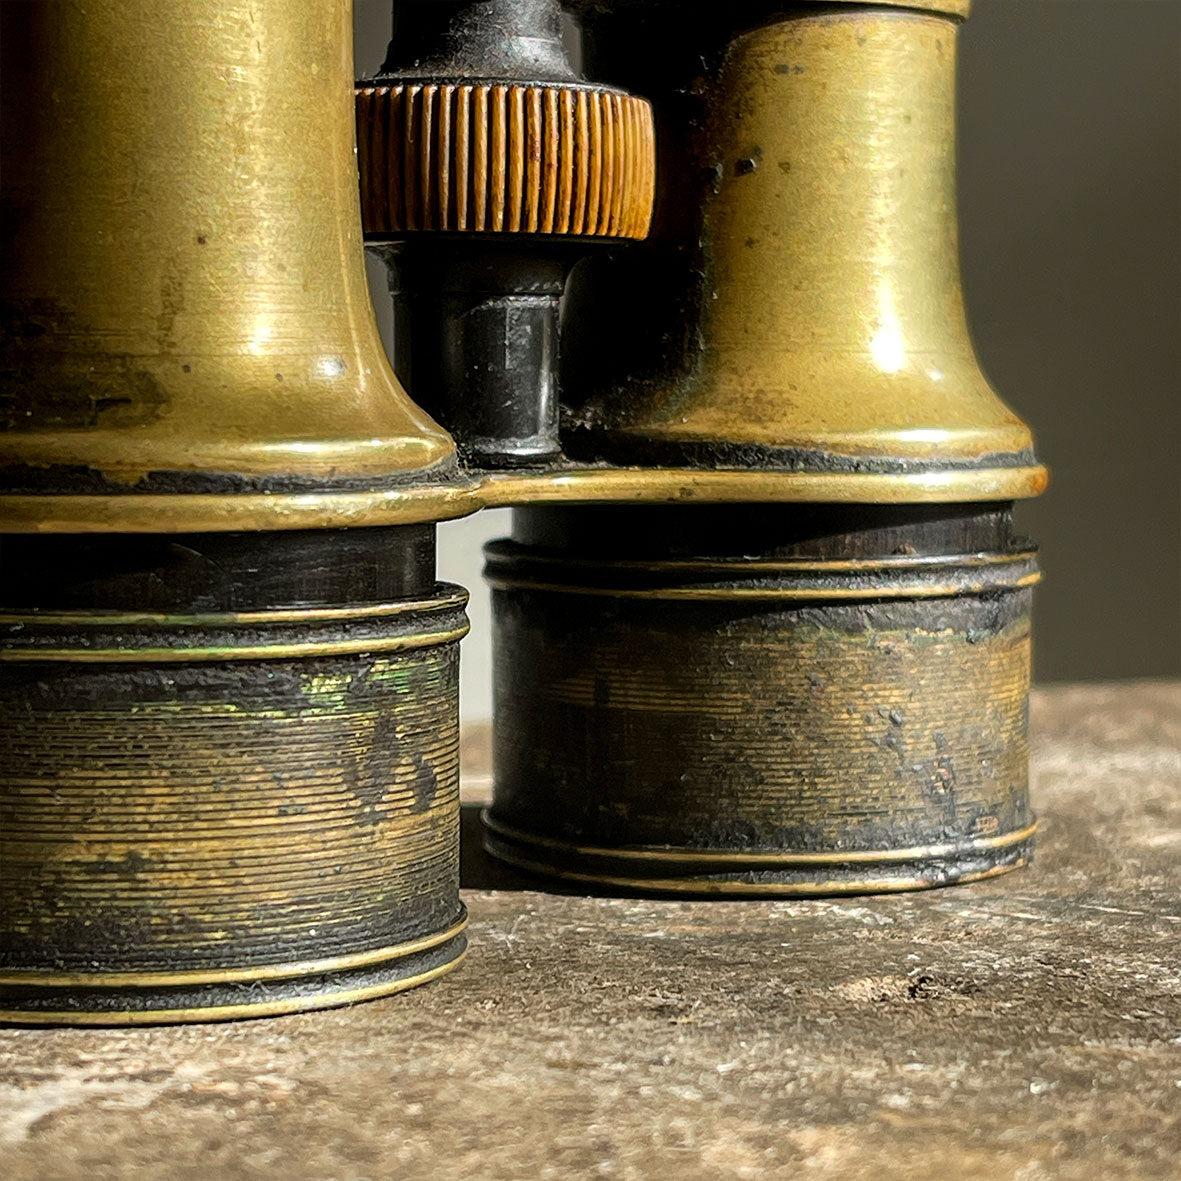 A pair of Victorian Negretti and Zambra binoculars. Made from brass and have a patinated black finish to the brass that has worn away over the years.The mark of NEGRETTI & ZAMBRA -OPTICIANS TO THE QUEEN appears around the rim of one of the eye pieces and 'ADJUSTED IN LONDON' around the other. - SHOP NOW - www.intovintage.co.uk